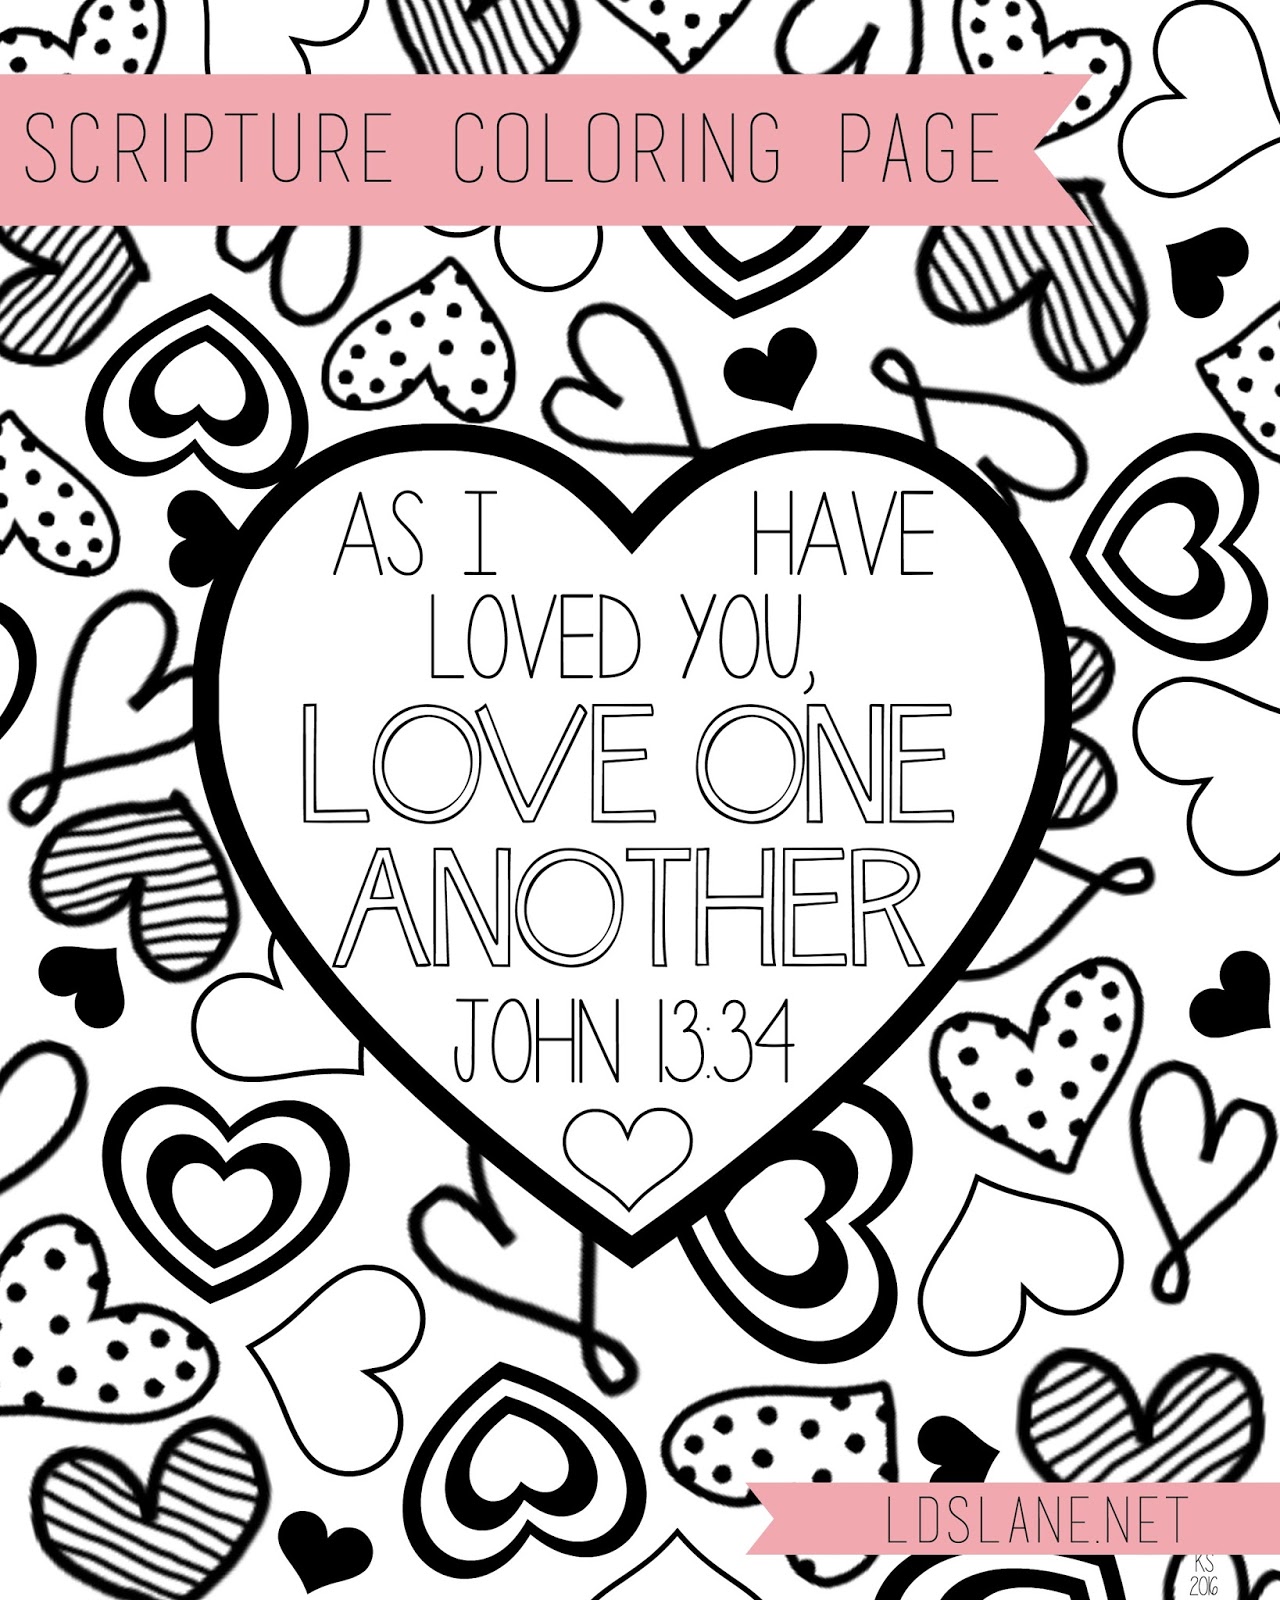 Scripture Coloring Page: Love One Another